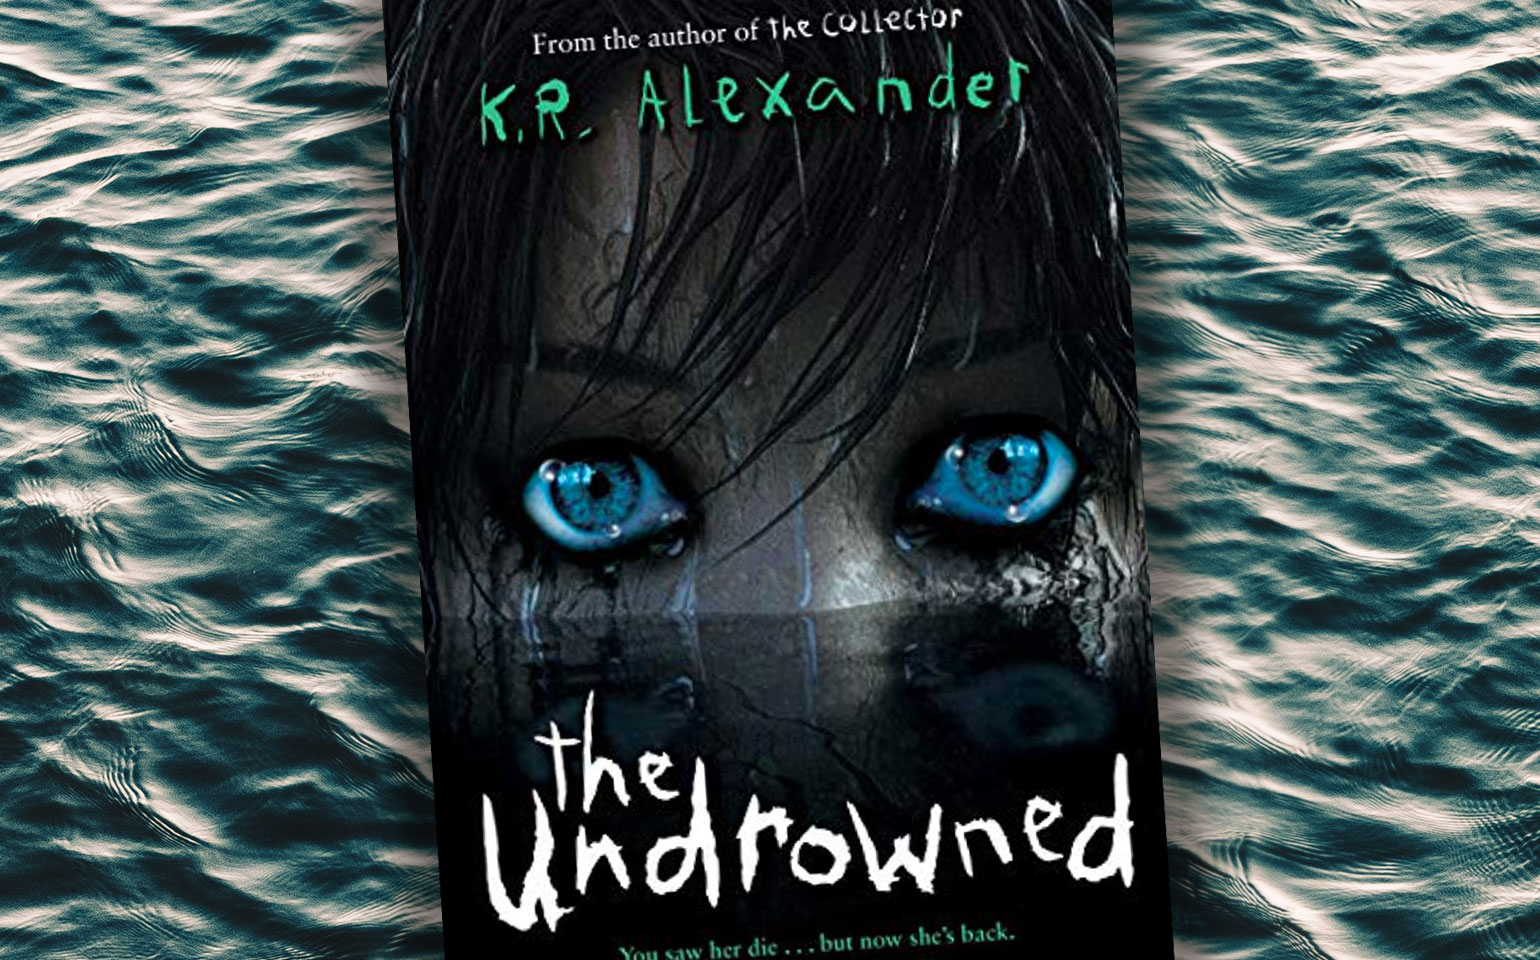 The cover of The Undrowned is shown, with a pair of eyes staring back at the reader.